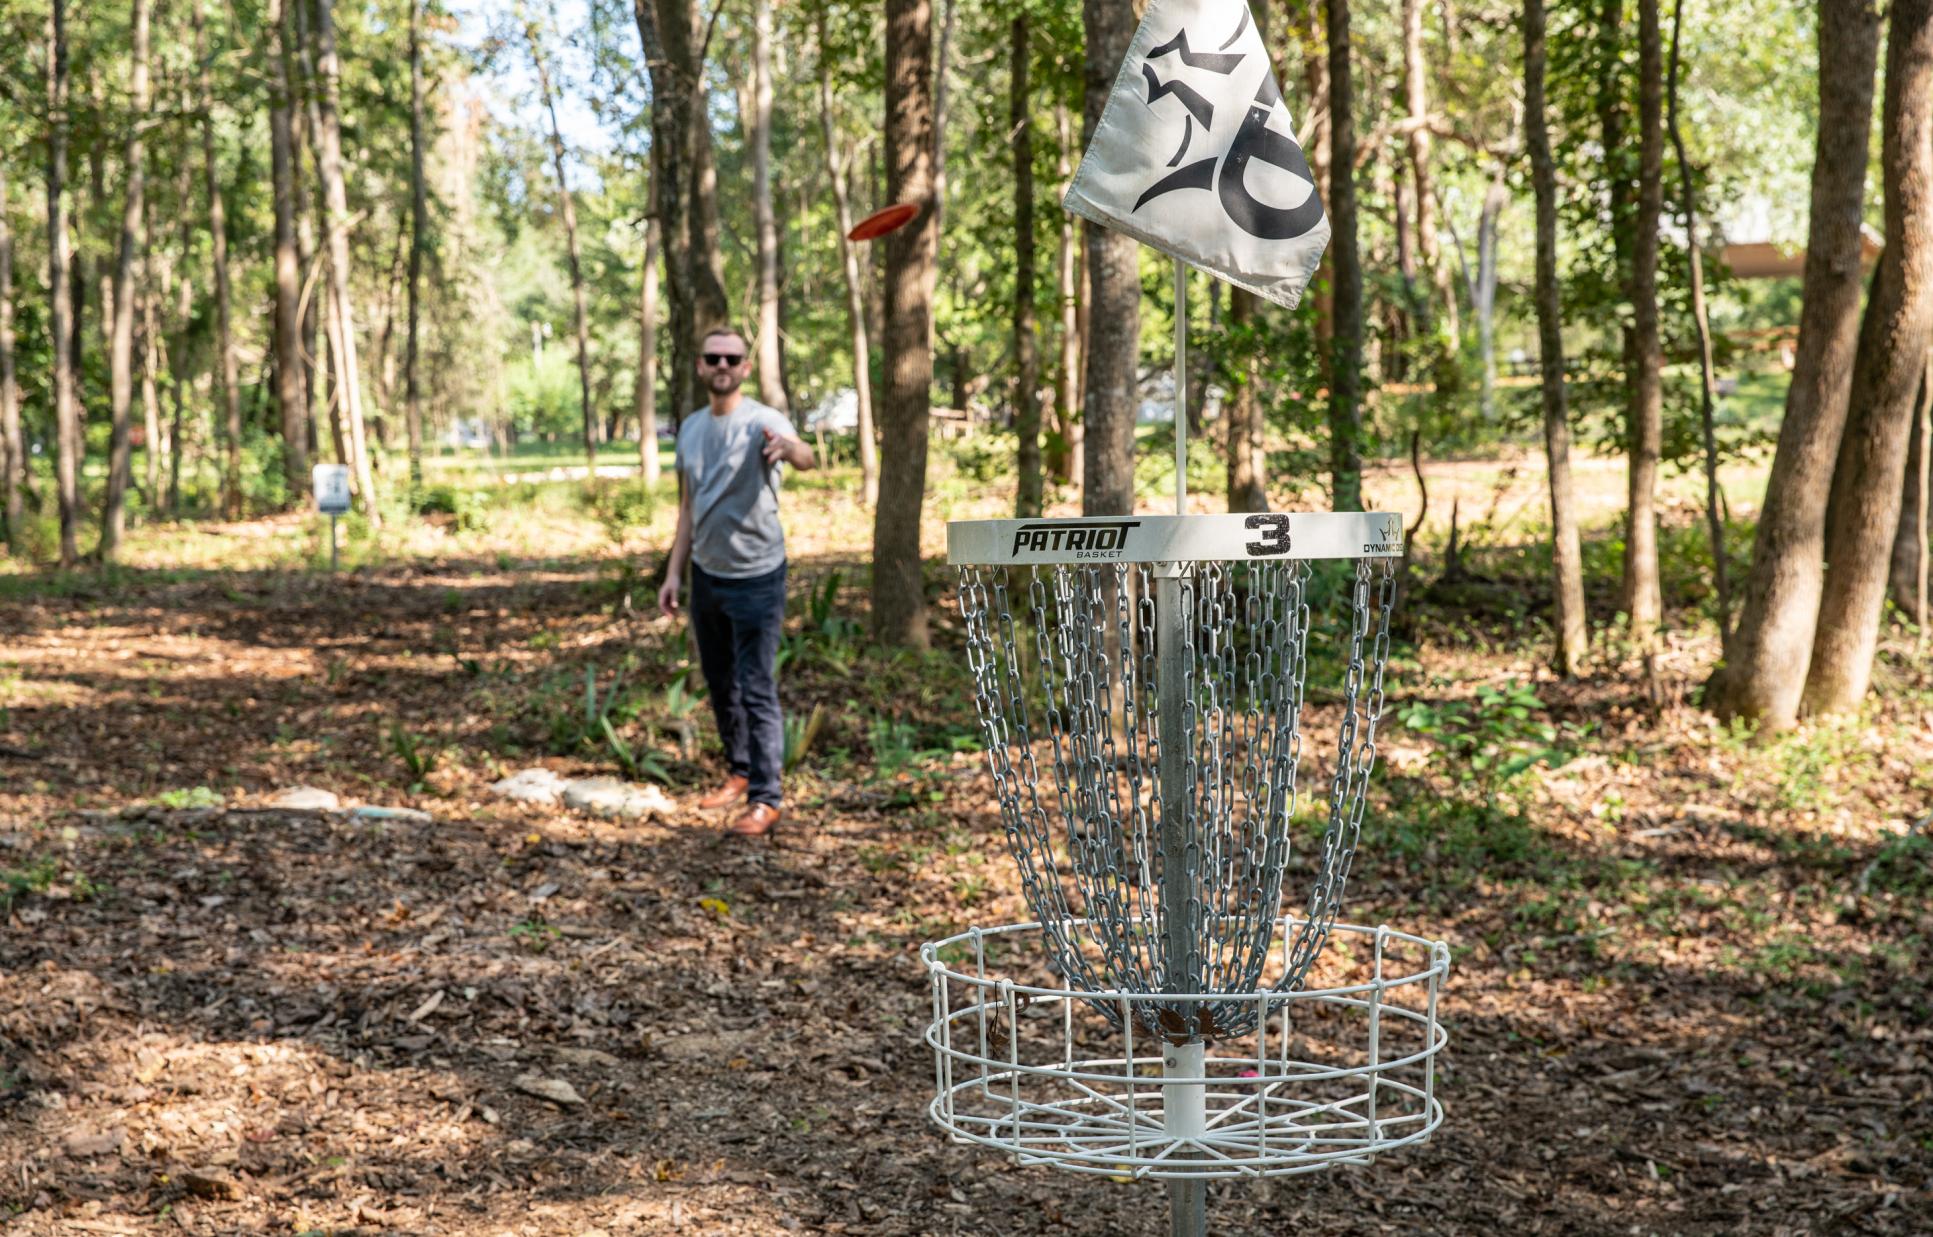 Visitor playing disc golf